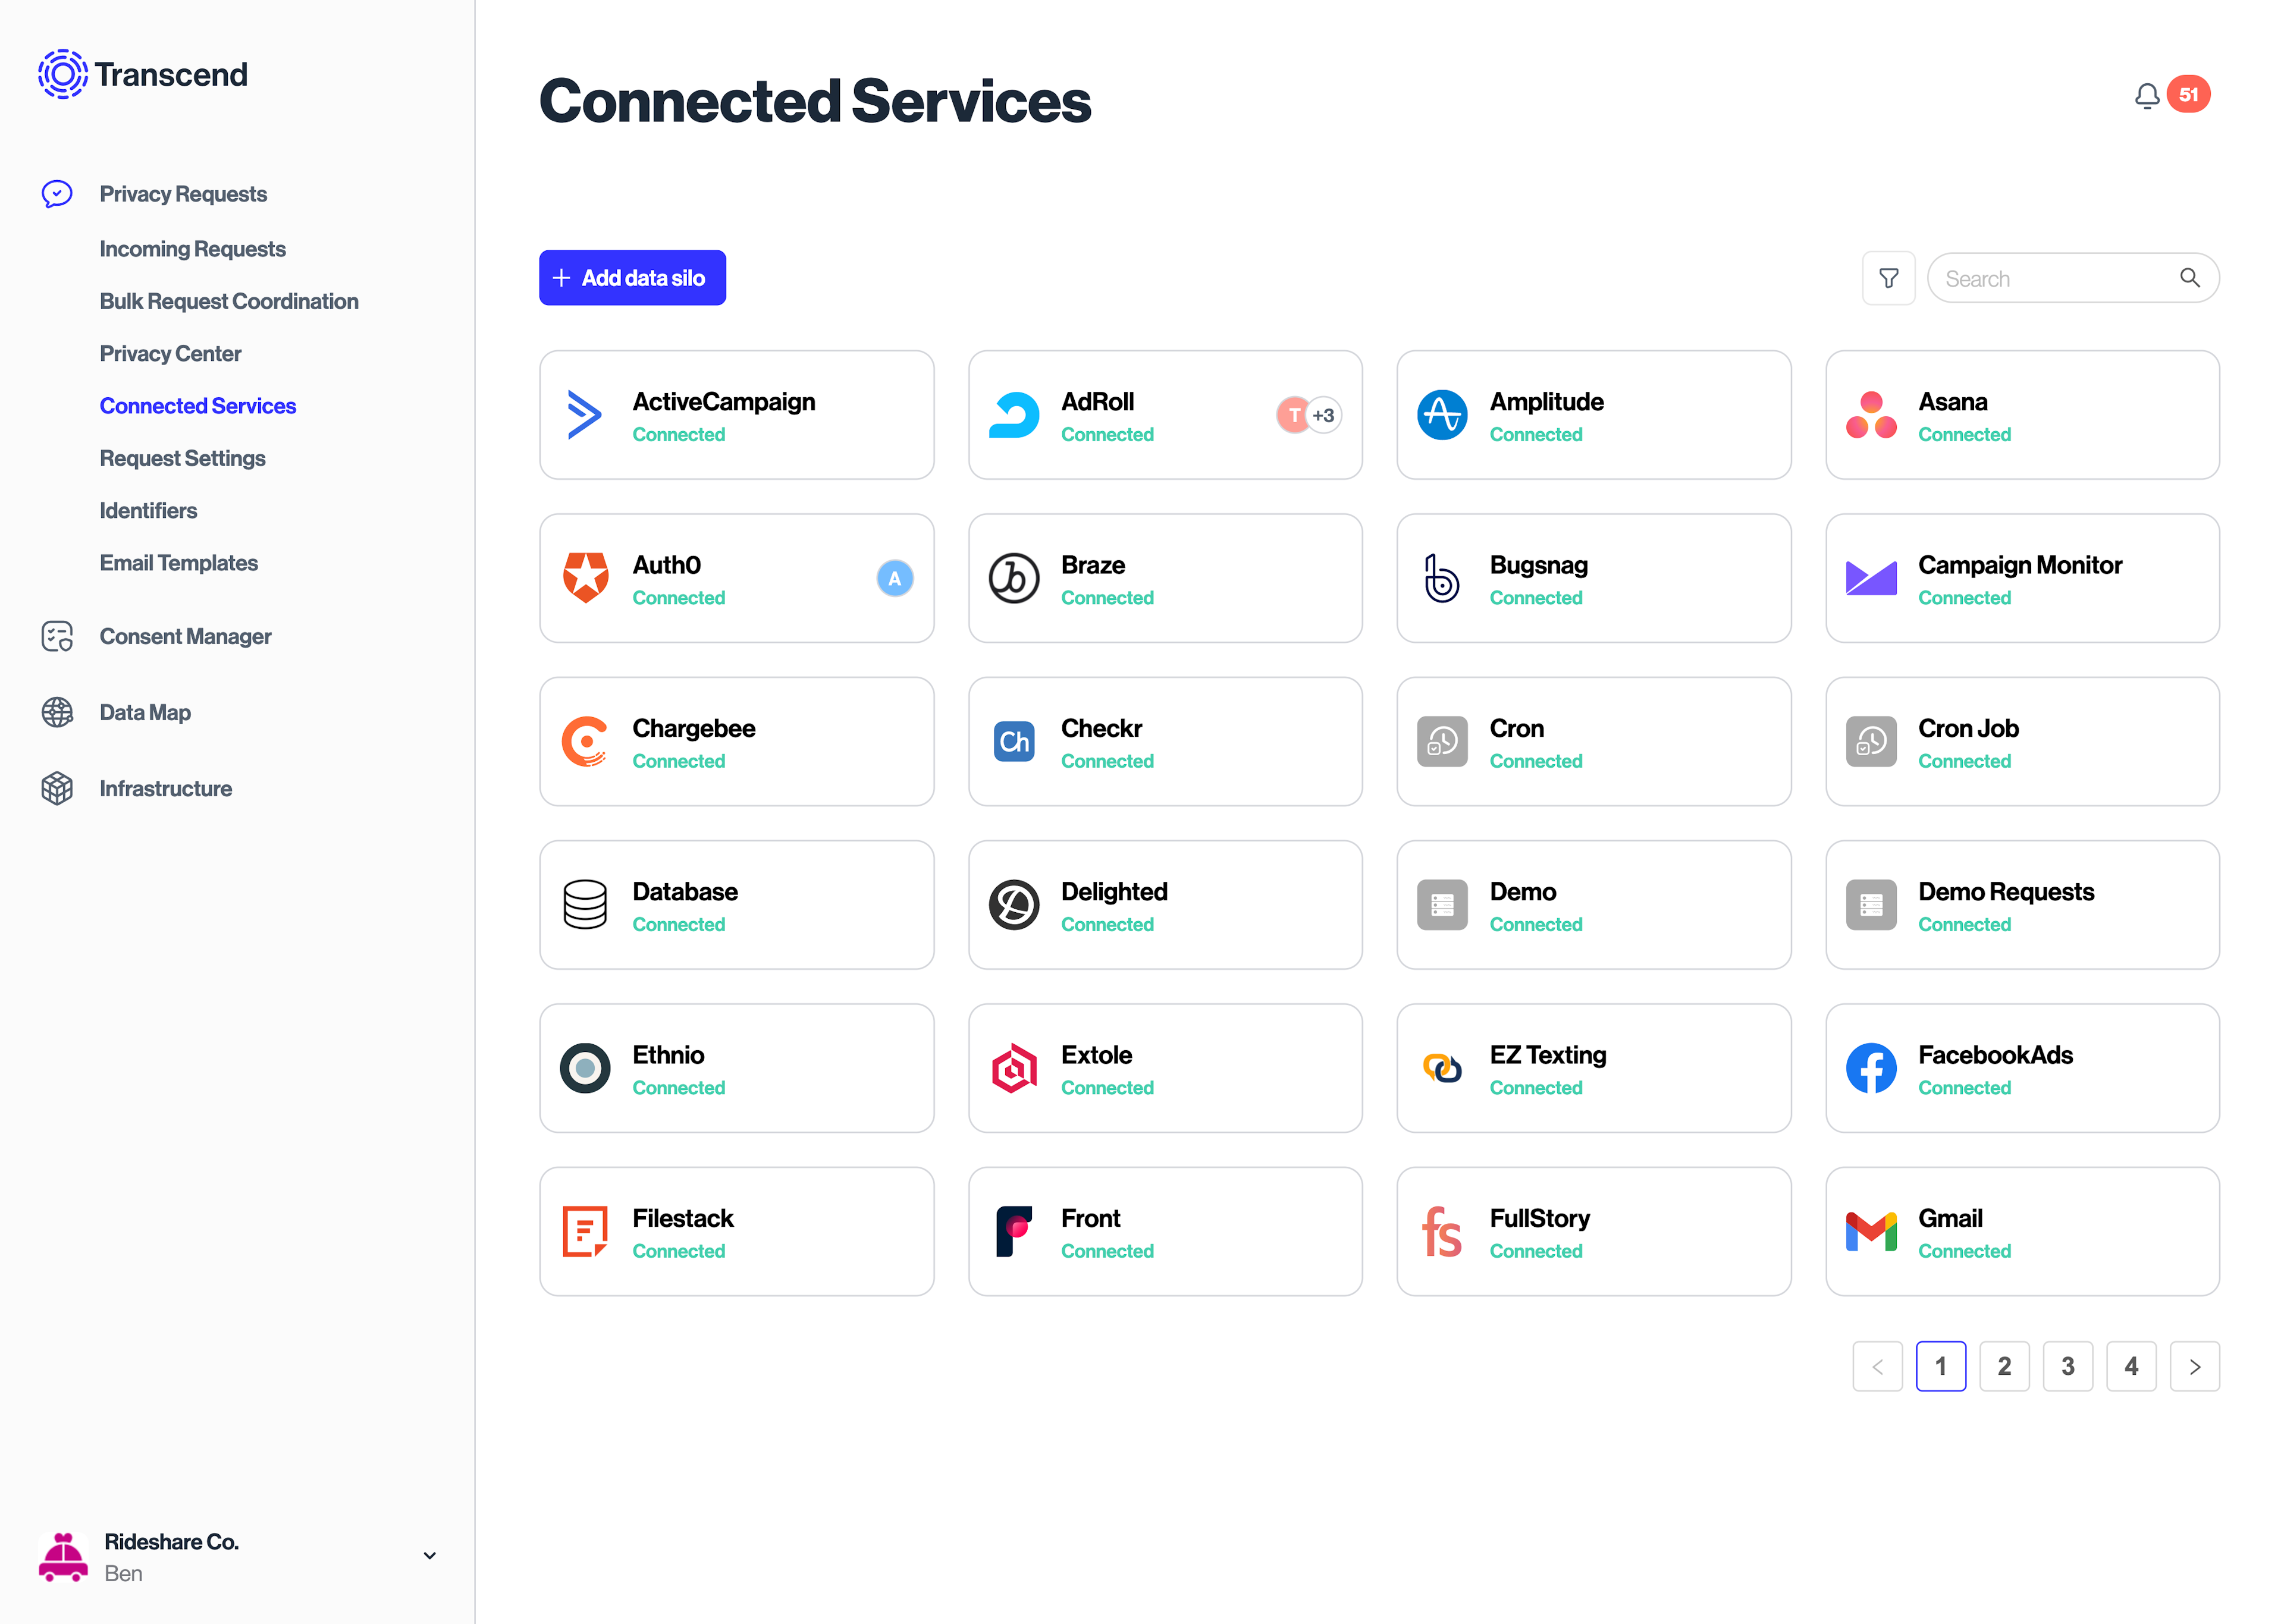 The Integrations page, showing the integrations connected to a Transcend account.